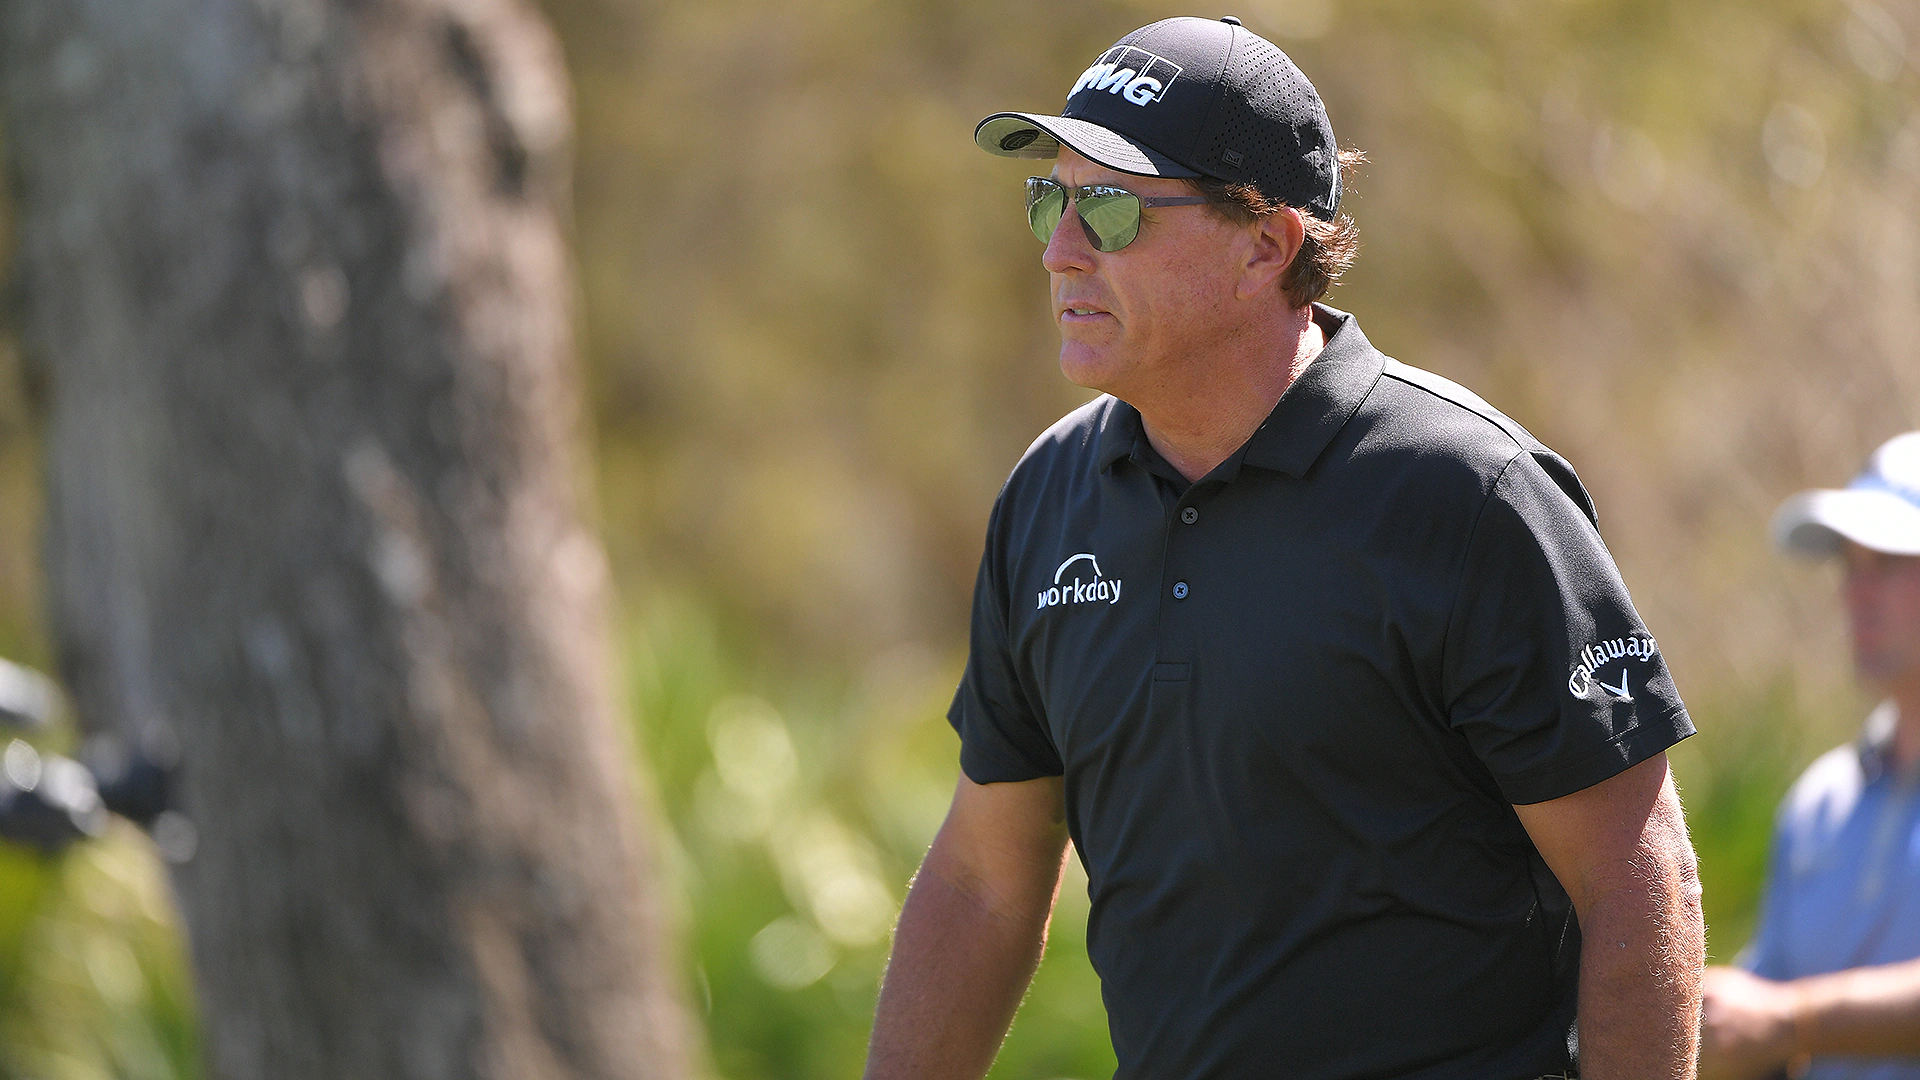 Phil Mickelson, citing lack of focus, makes six birdies, shoots even par at 2021 Players